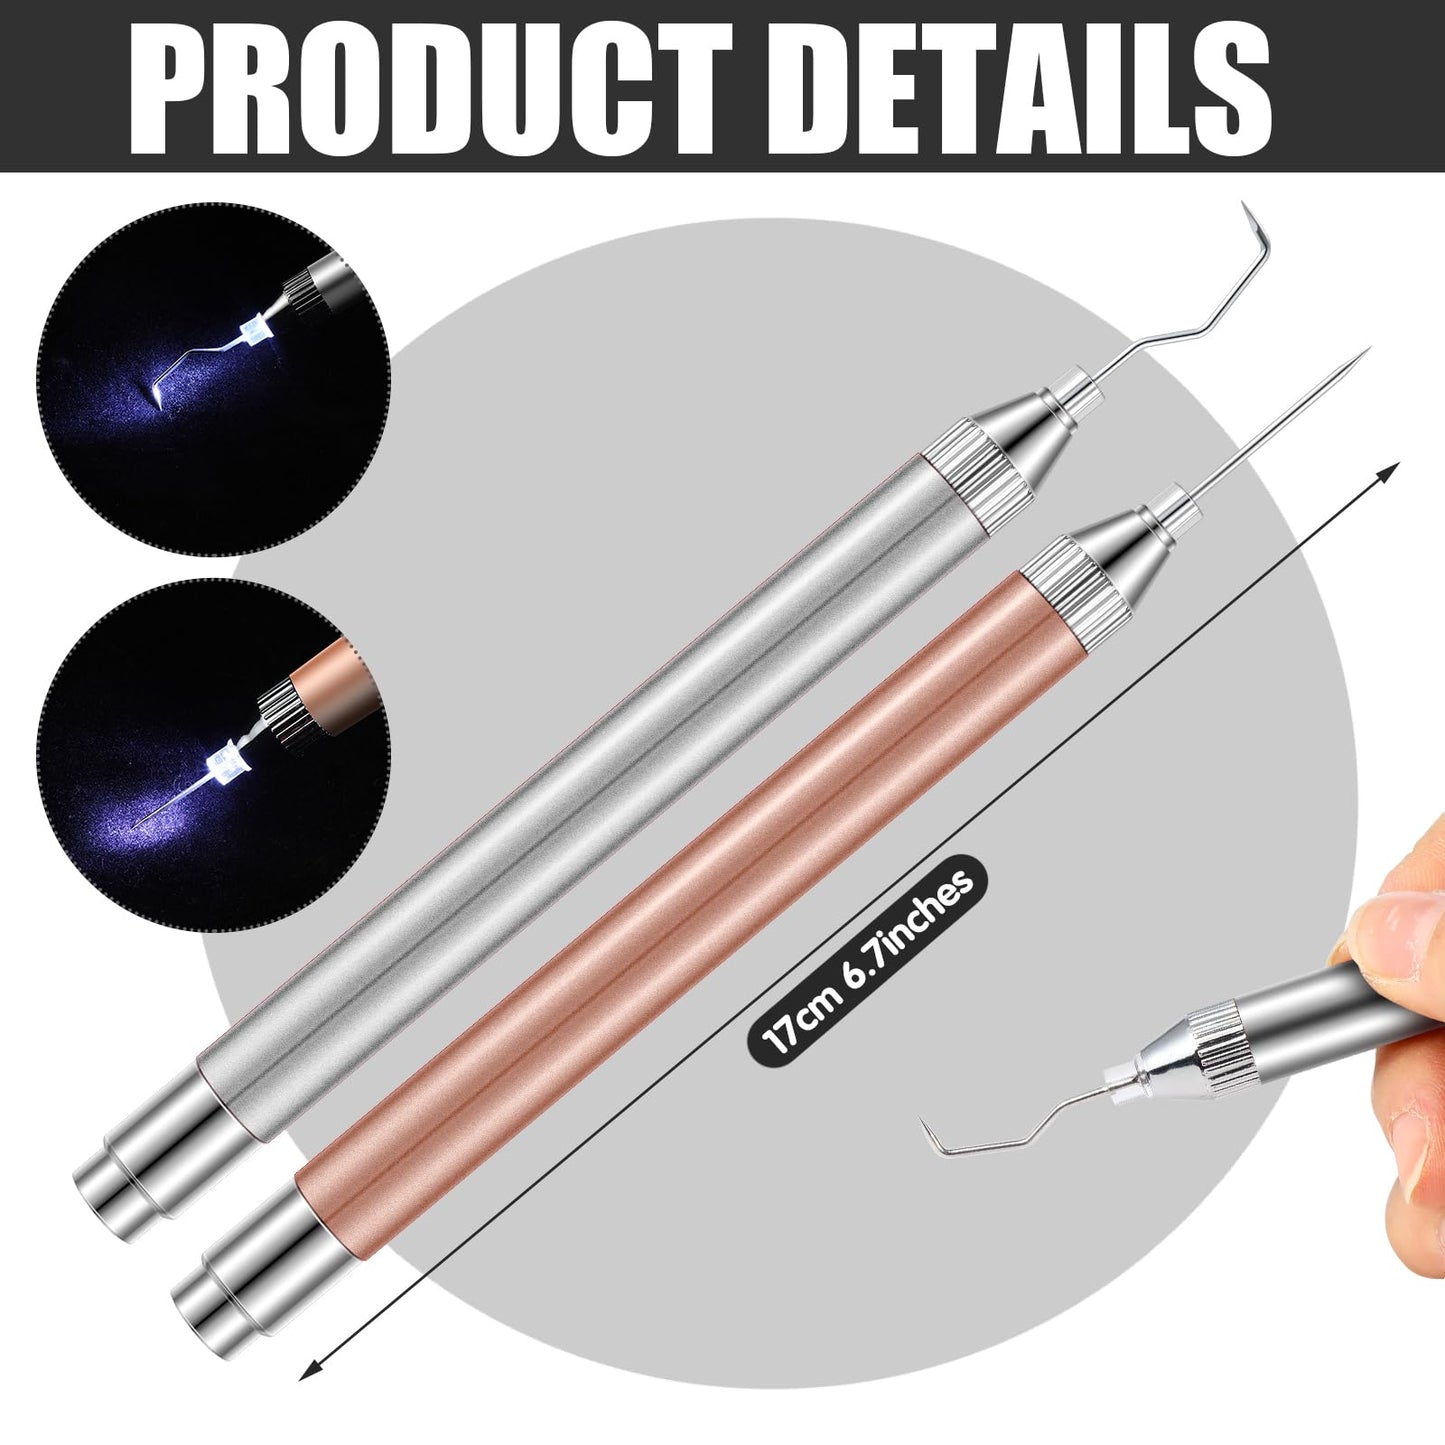 Therwen 2 Pcs LED Weeding Tools for Vinyl Weeding Vinyl Tool with Light Pin Hook Lighted Weeding Pen for Removing Iron on Tiny Vinyl Paper Silhouette